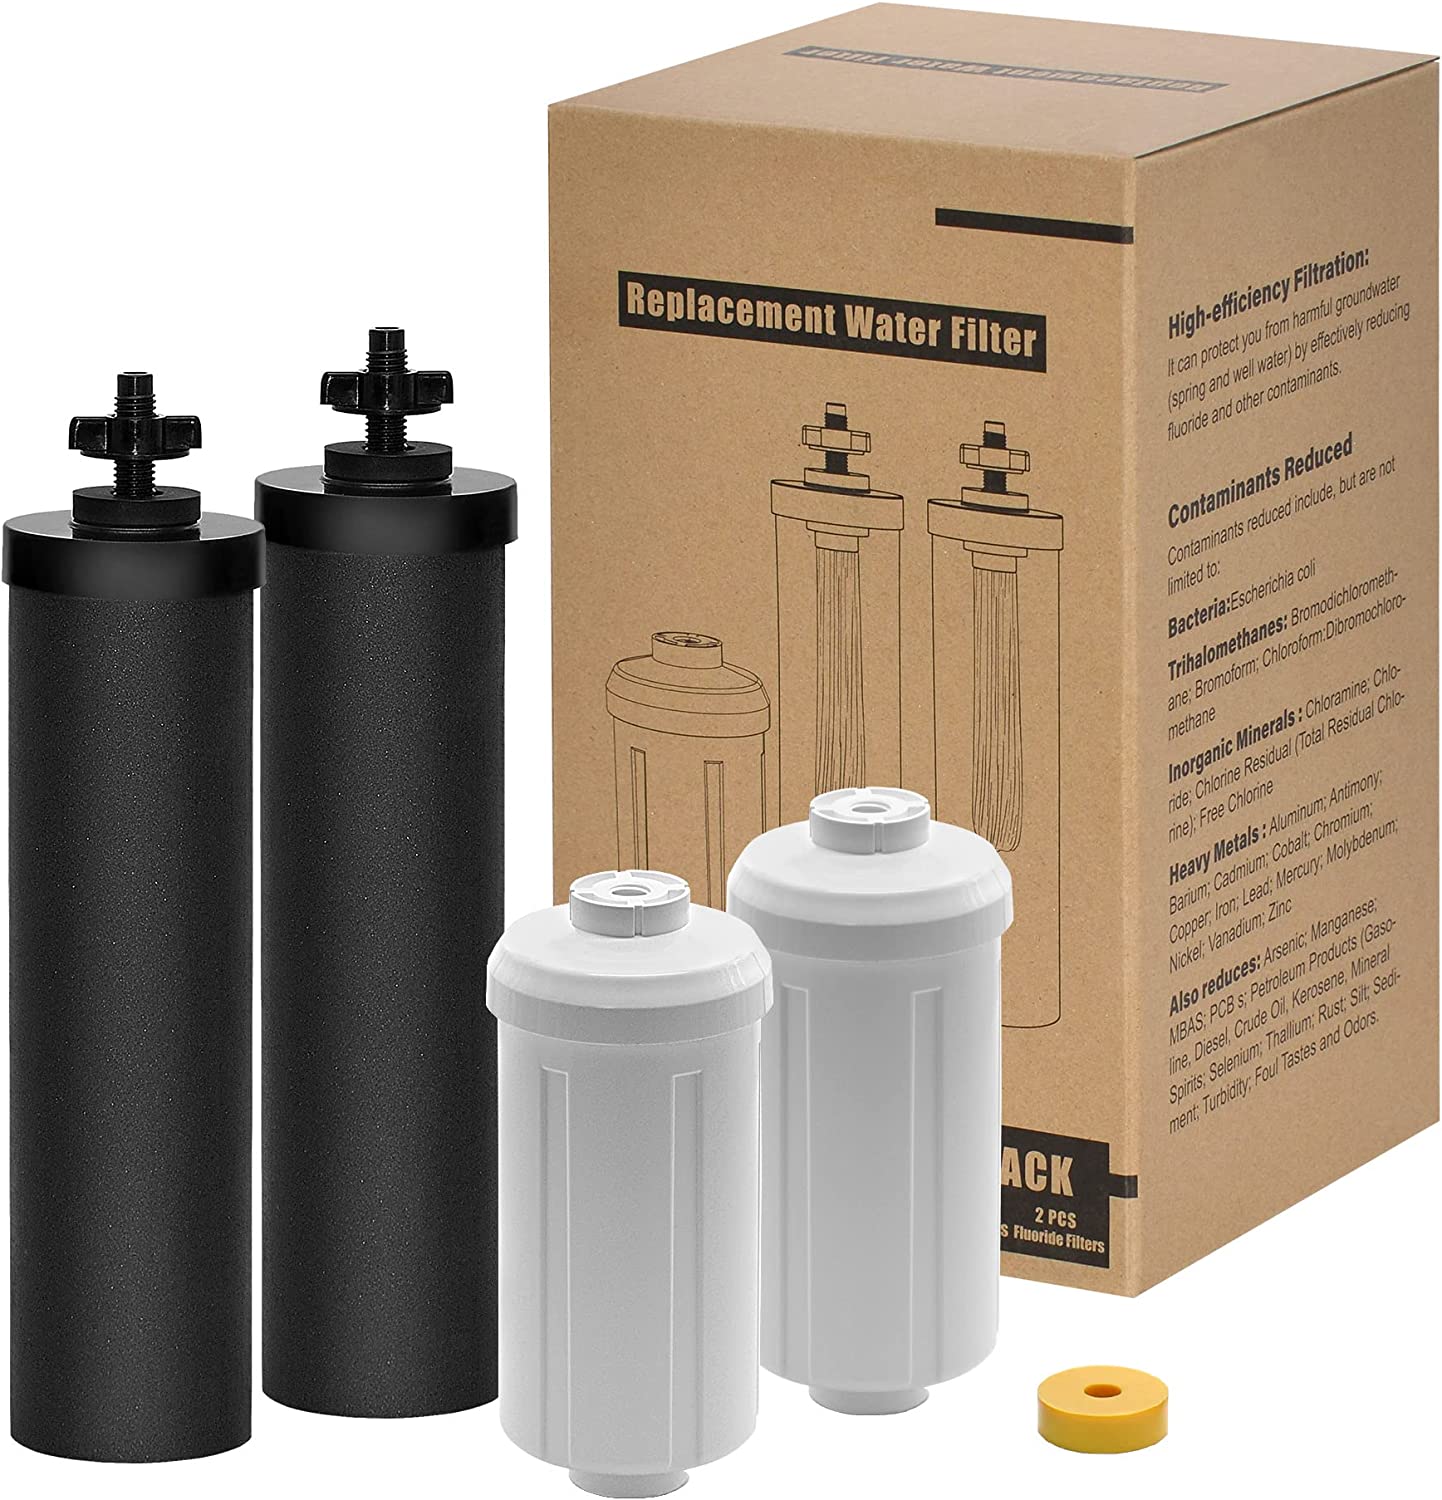 Black and Fluoride Water Filter Replacement Kit Compatible with Royal Berkey Water Filter System, 2 Pcs Black BB9-2 Filters and 2 Pcs PF-2 Fluoride Filters for Berkey Water Filters Replacement